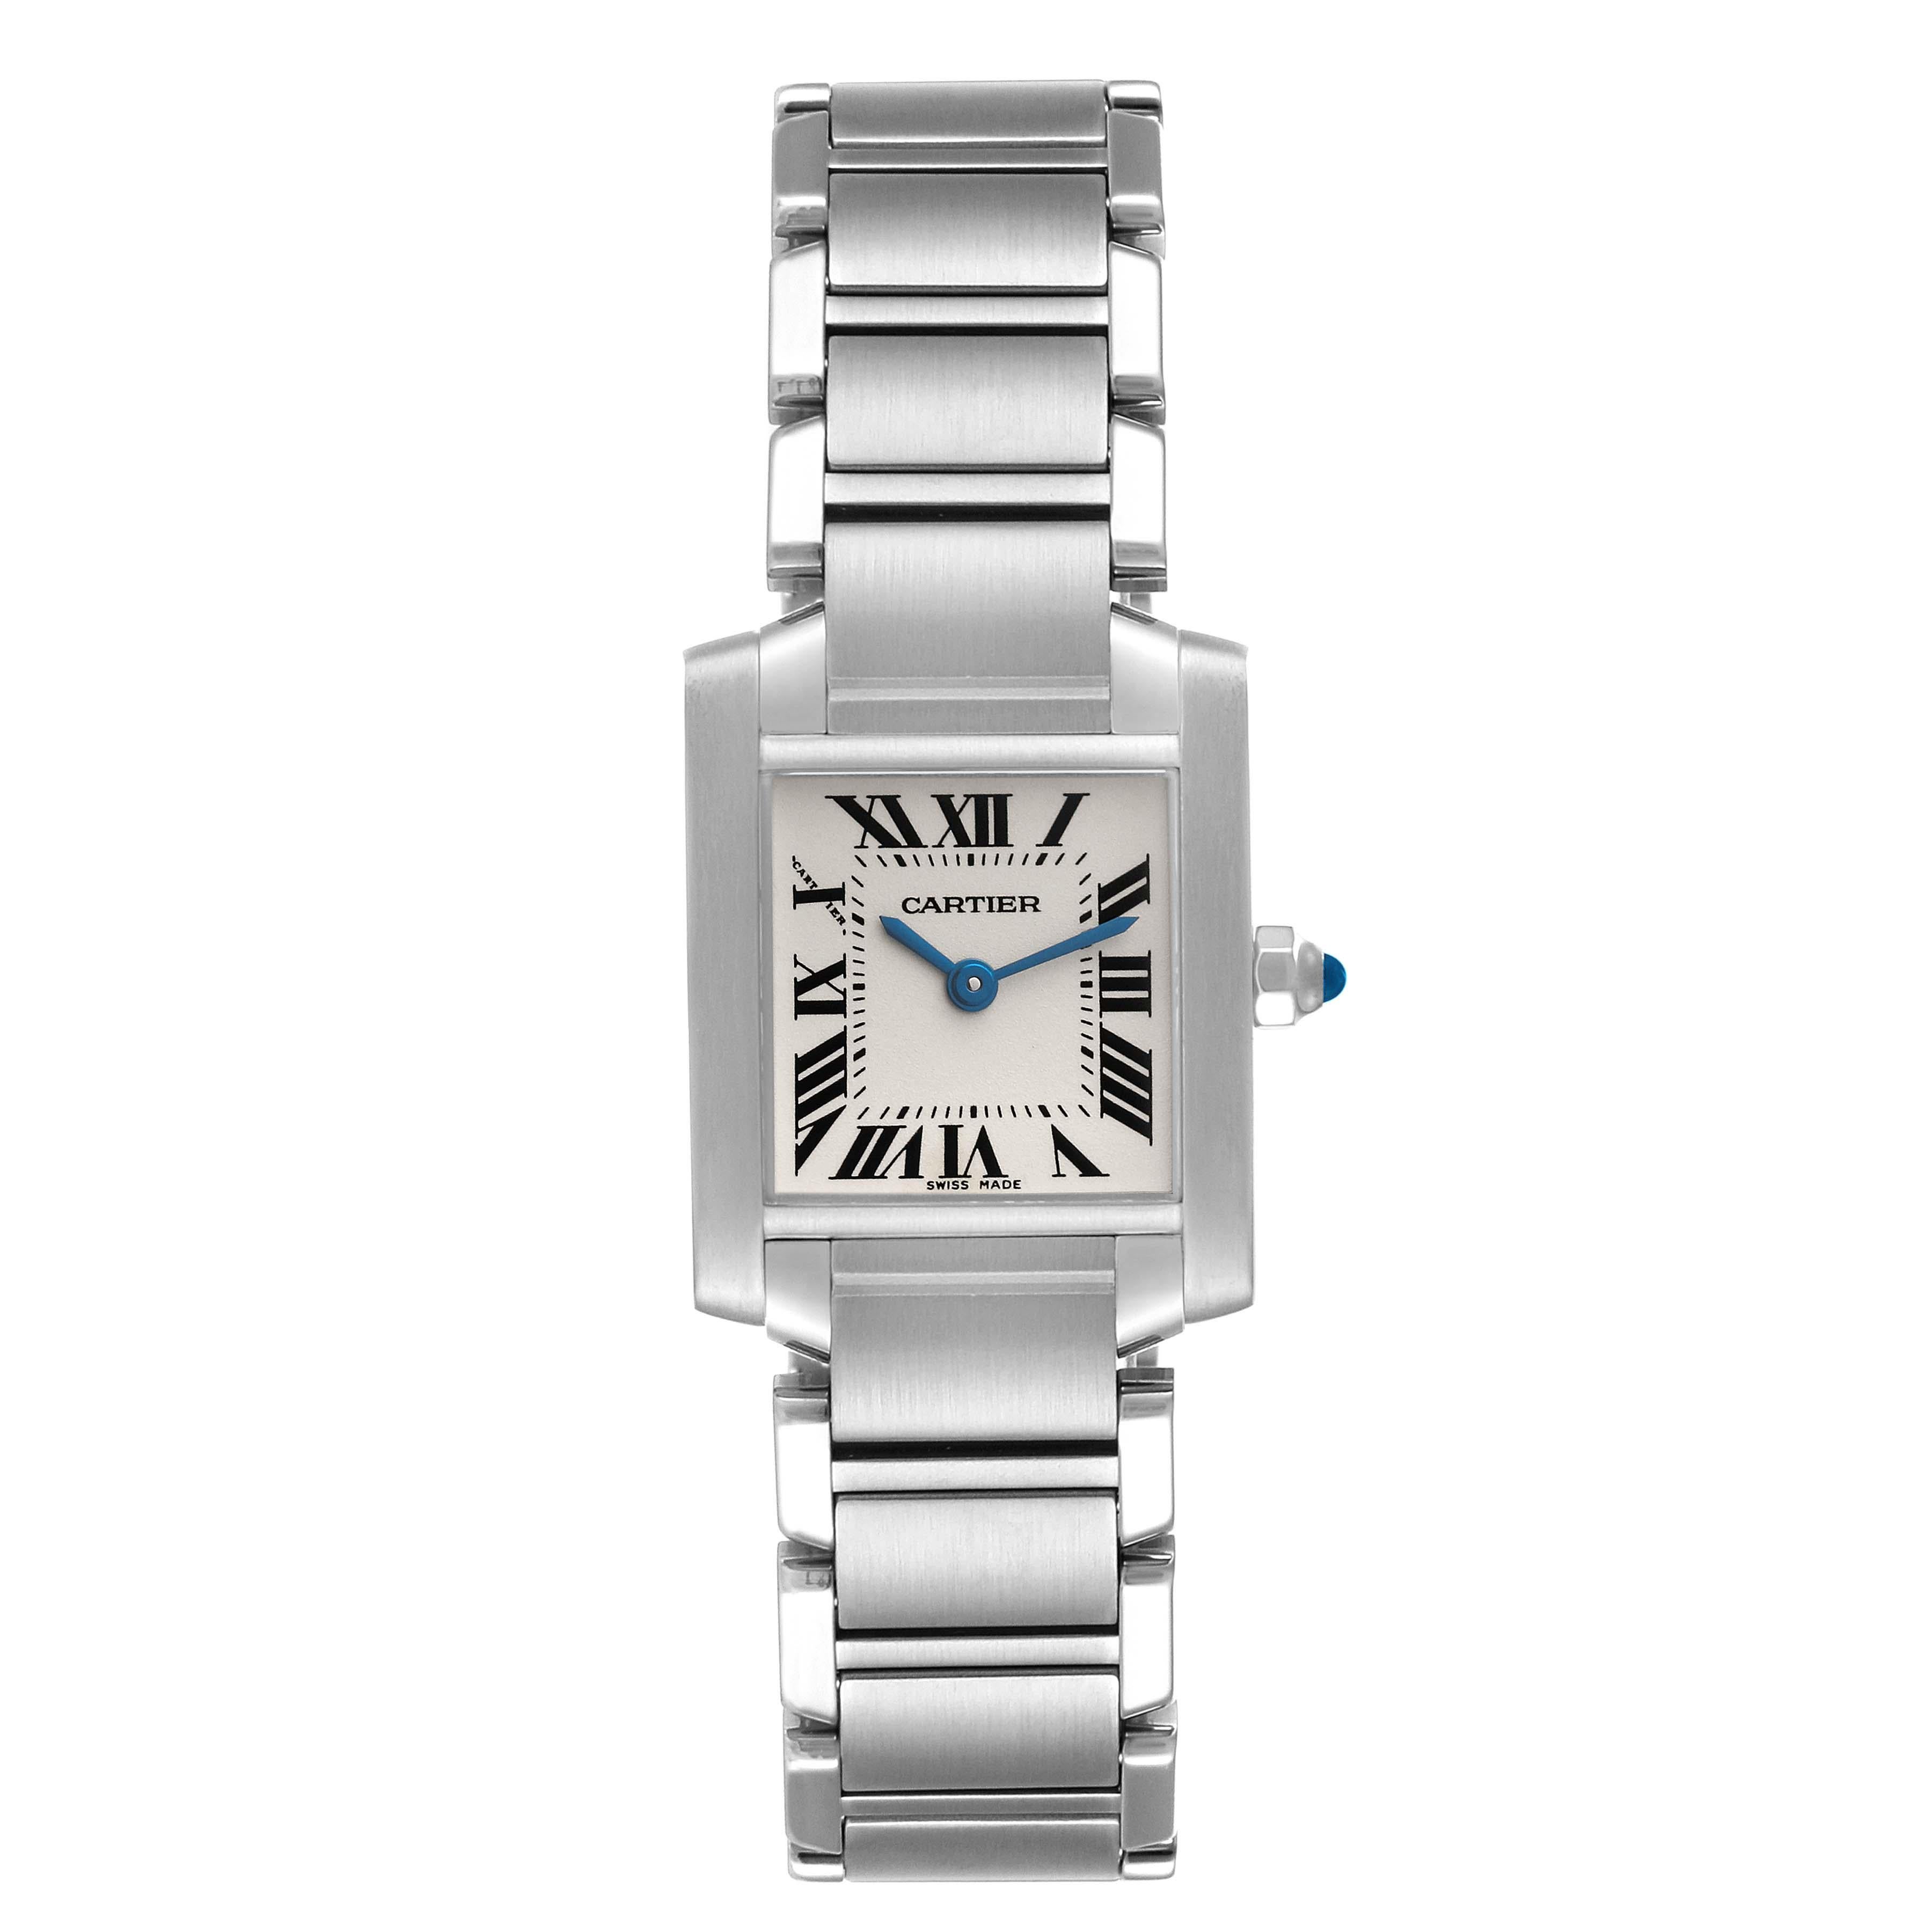 Cartier Tank Francaise Small Silver Dial Steel Ladies Watch W51008Q3 Papers. Quartz movement. Rectangular stainless steel 20.0 x 25.0 mm case. Octagonal crown set with a blue spinel cabochon. . Scratch resistant sapphire crystal. Silver opaline dial